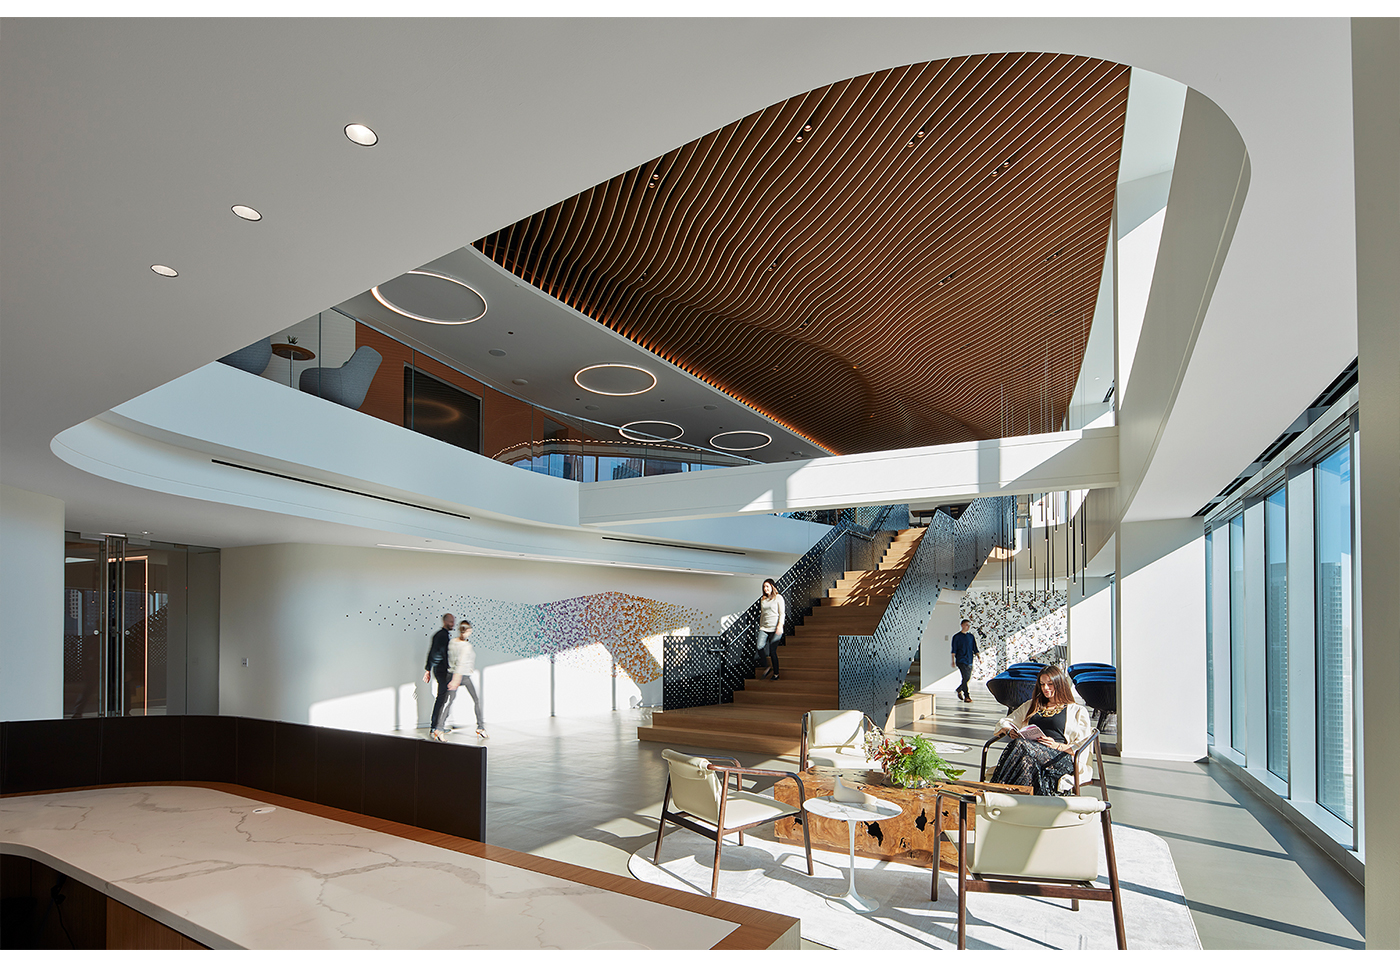 Mead Johnson Lobby Overview